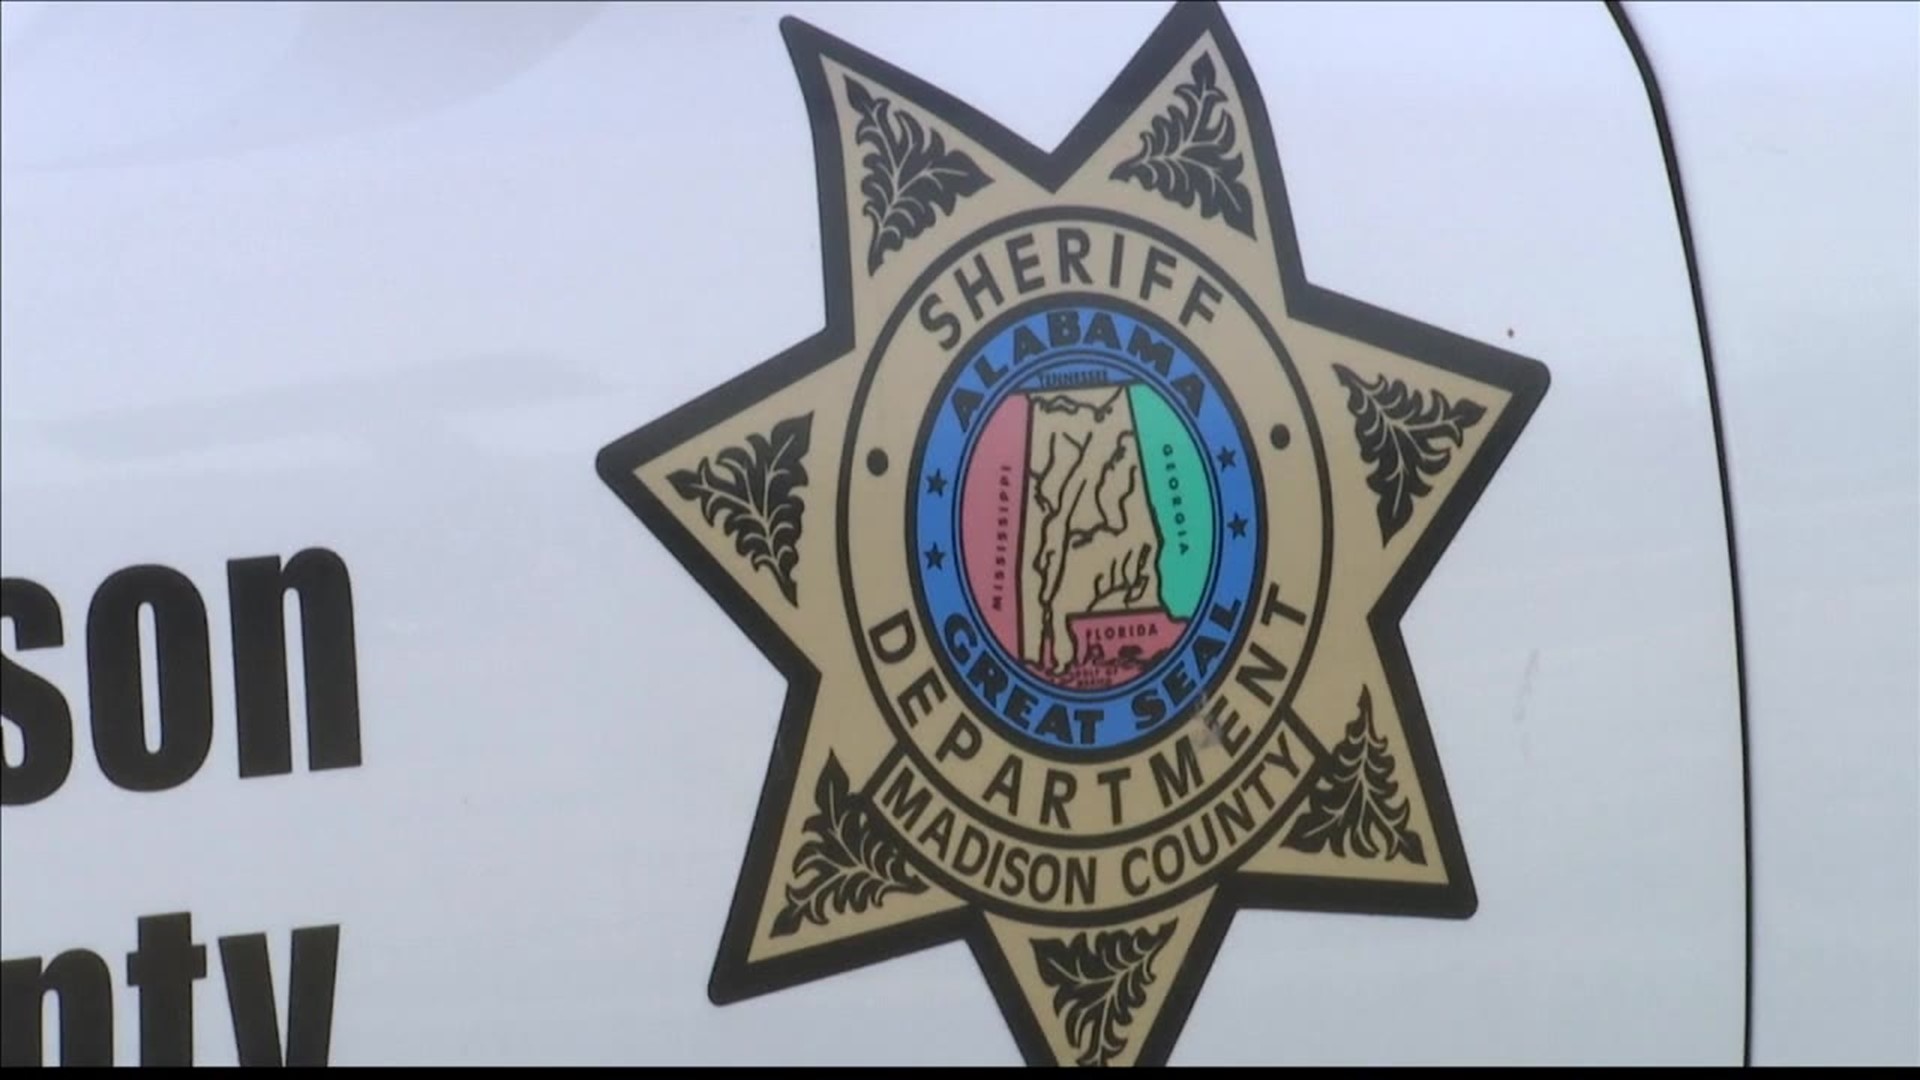 The Madison County Sheriff's Office is hiring more deputies, but the recent violence toward law enforcement could affect how many people want the jobs.